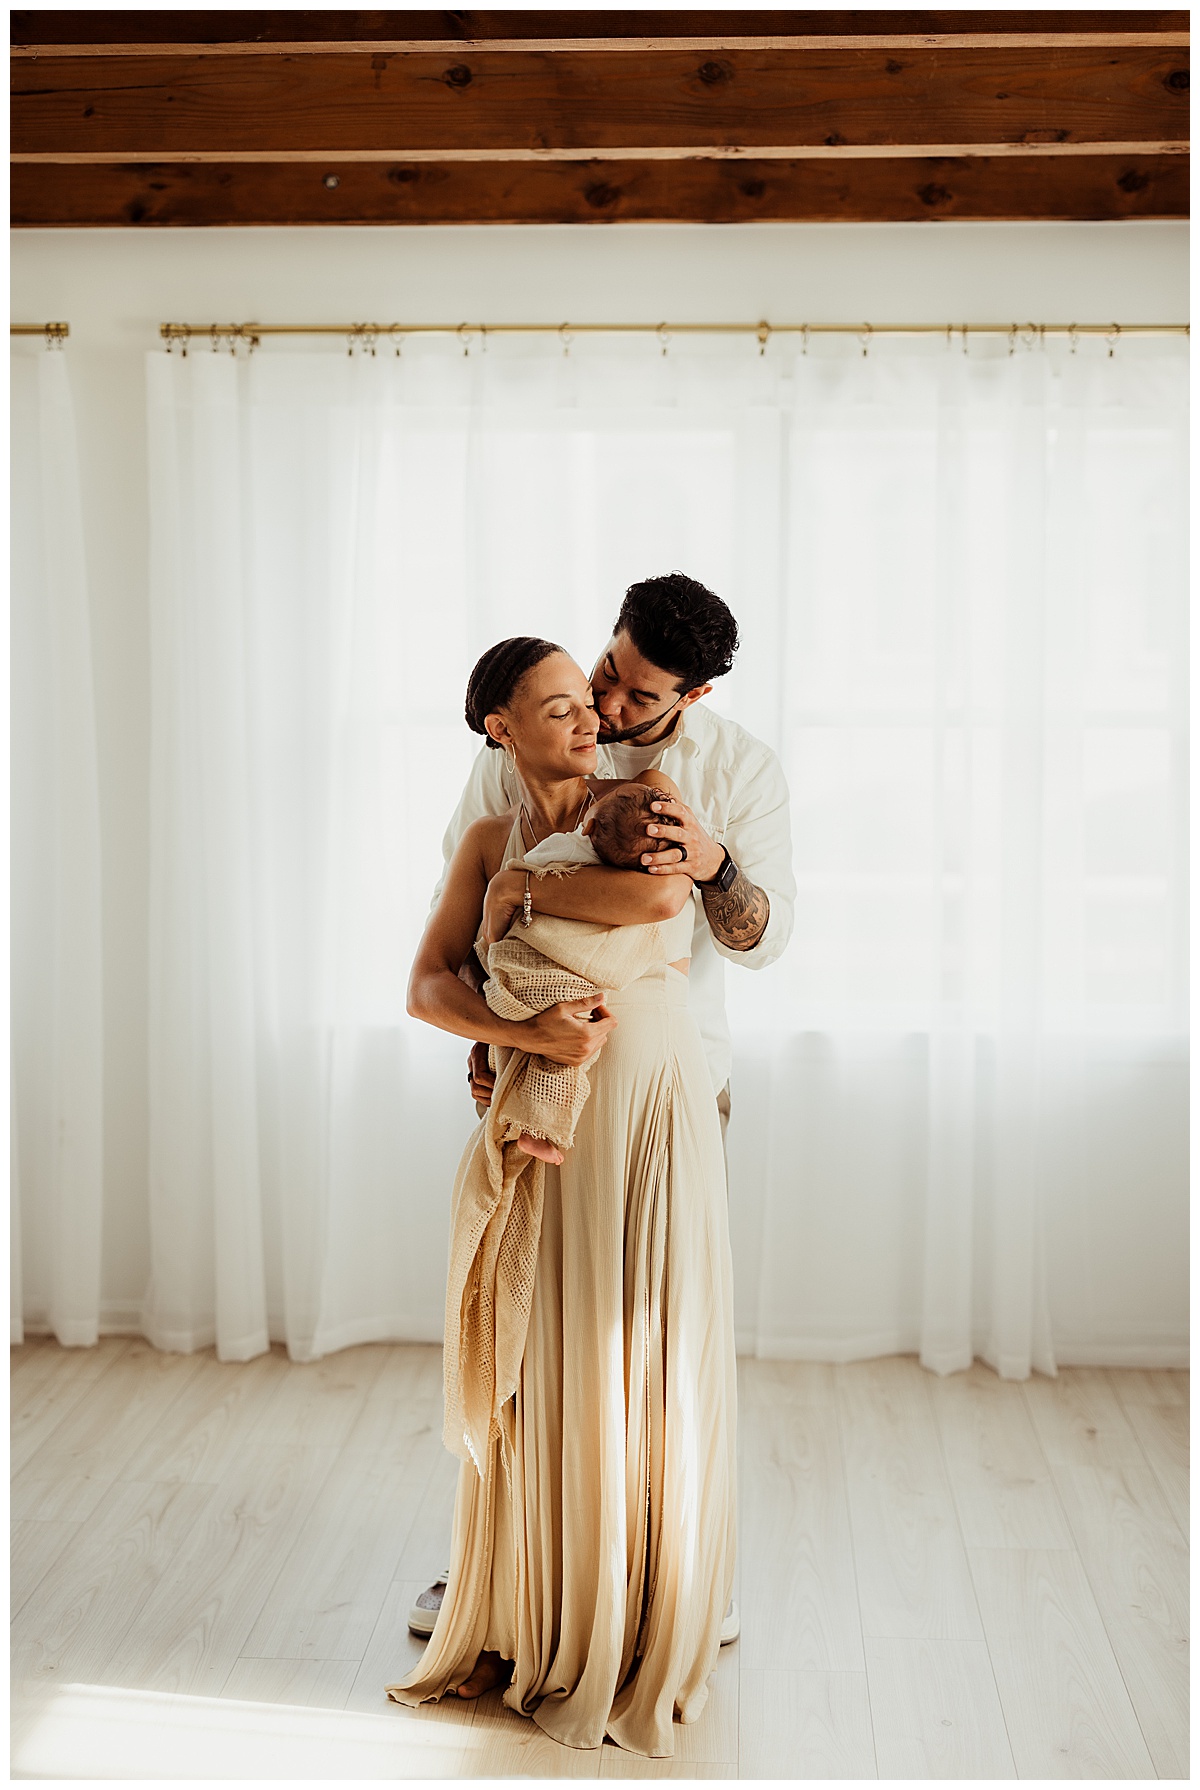 Mom and dad hold their baby close during their Lifestyle Newborn Session